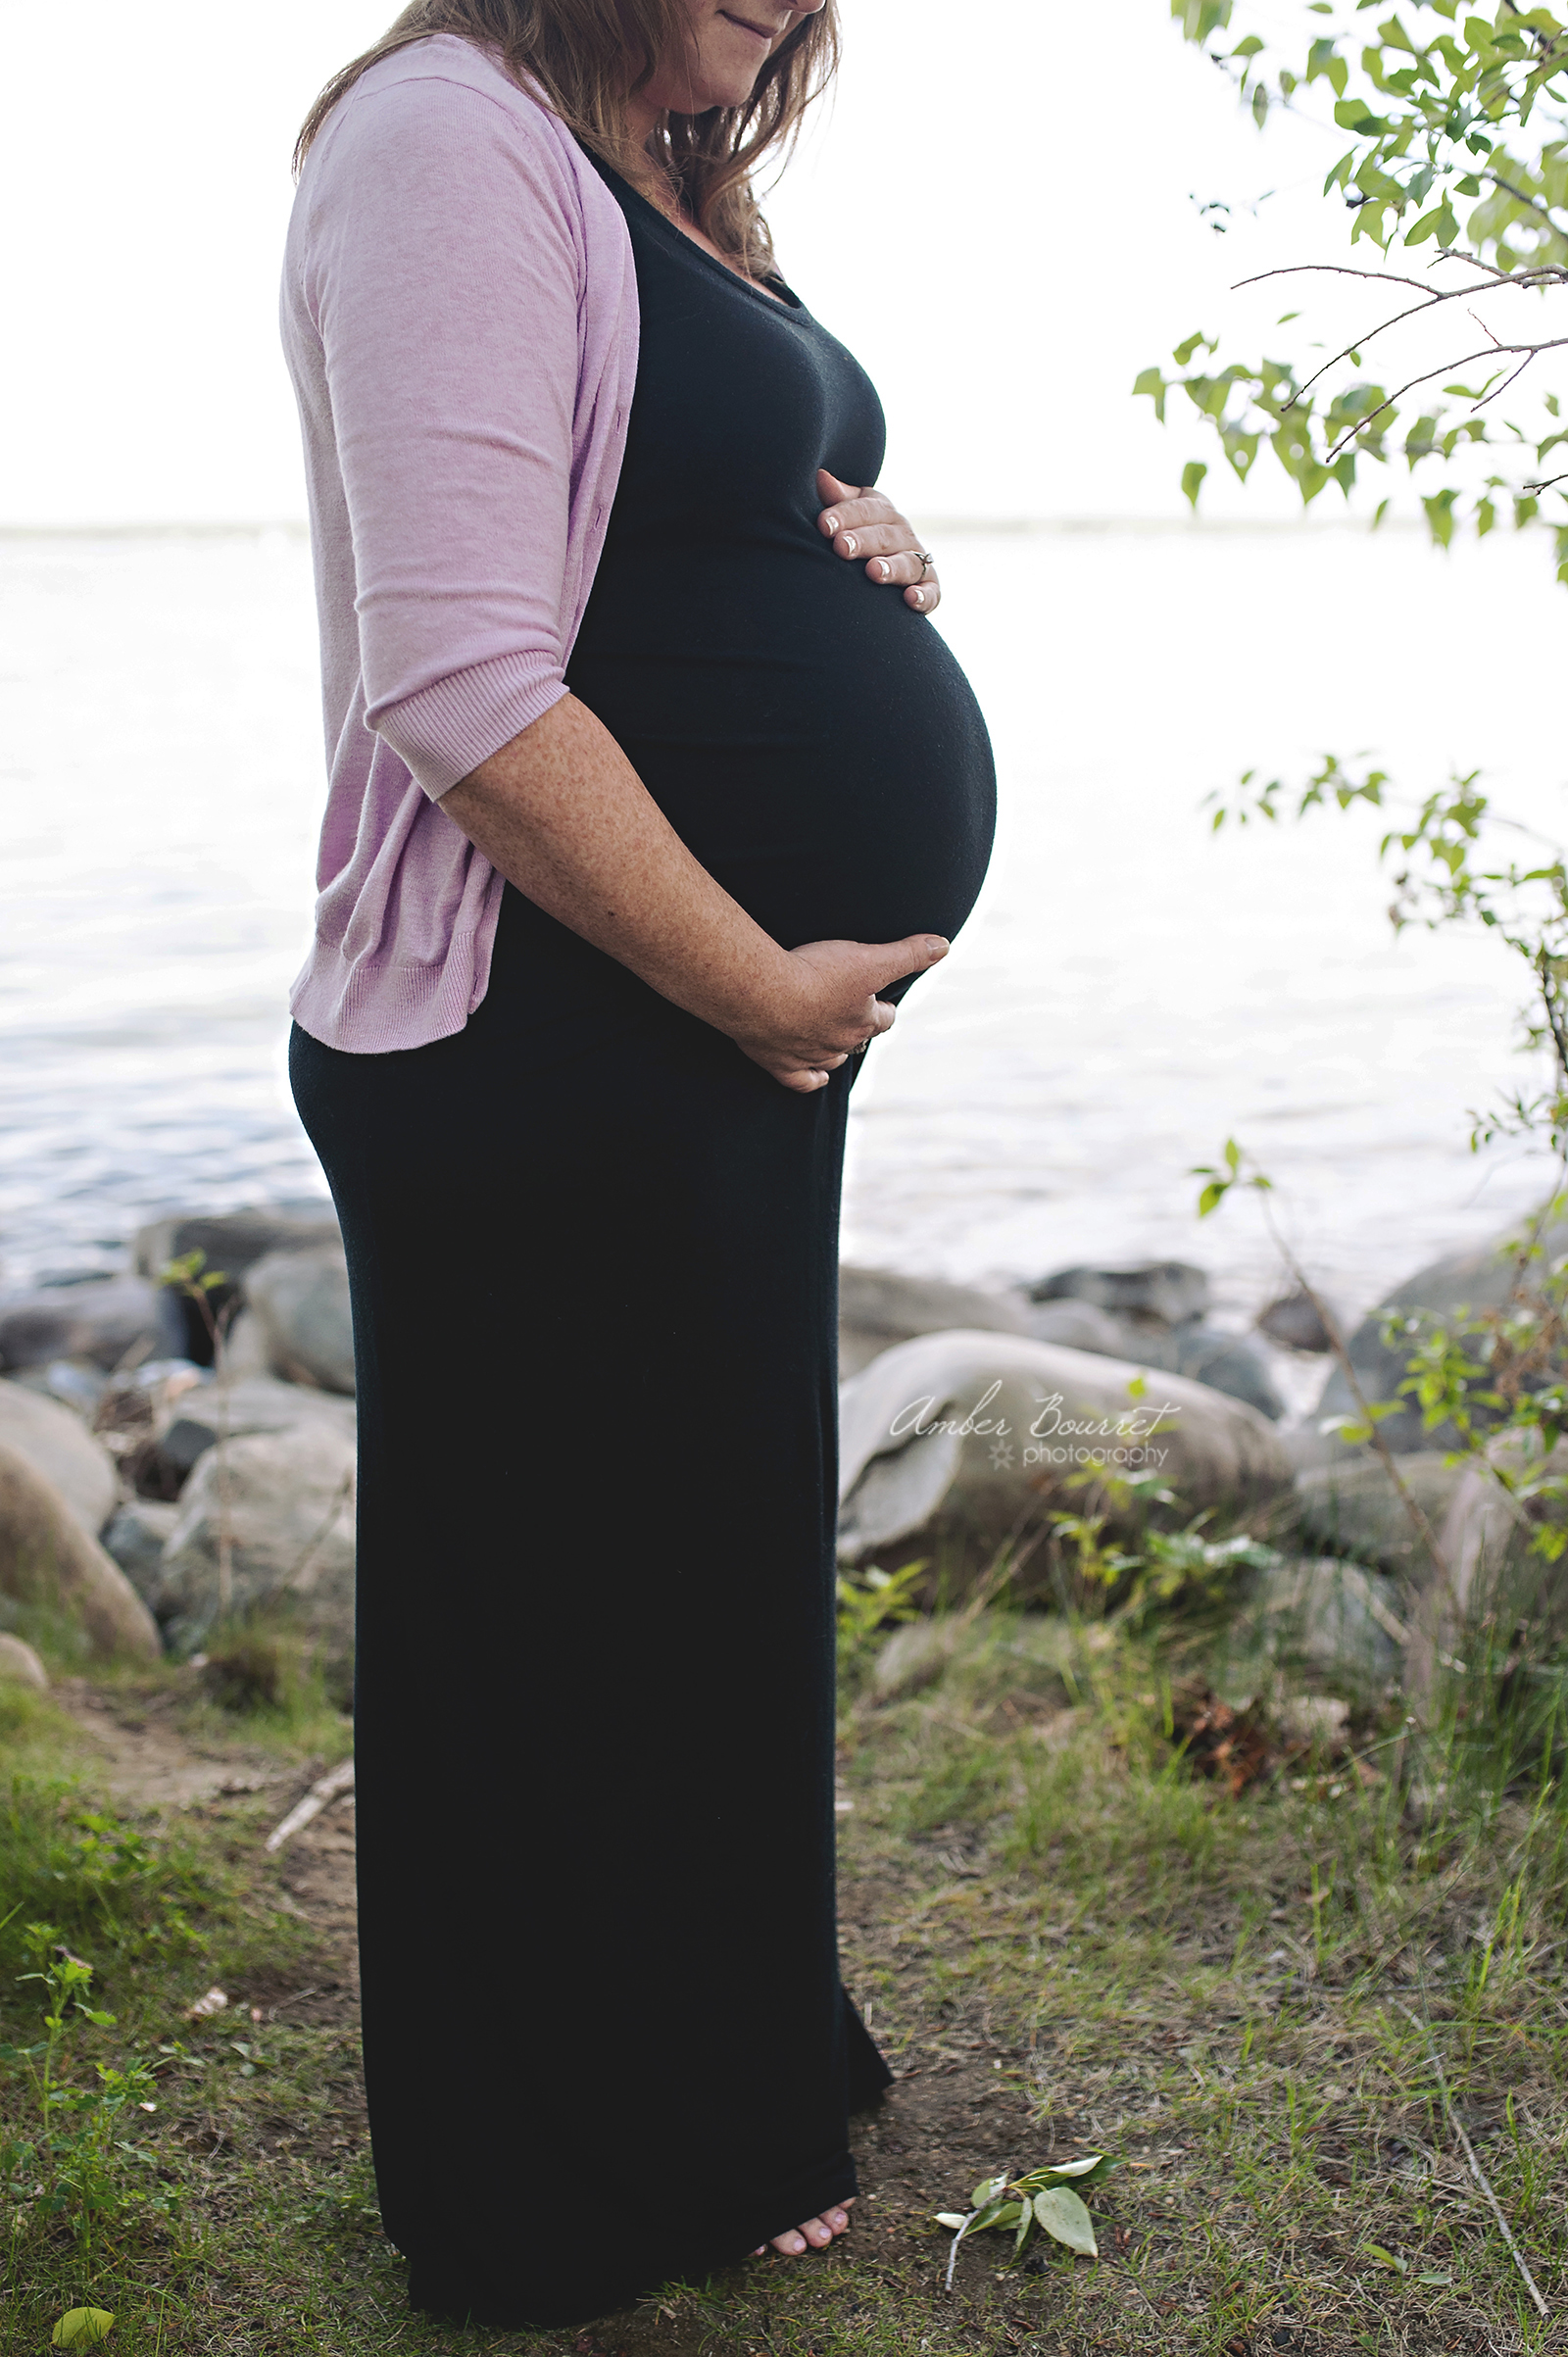 cc red deer maternity photography (65)